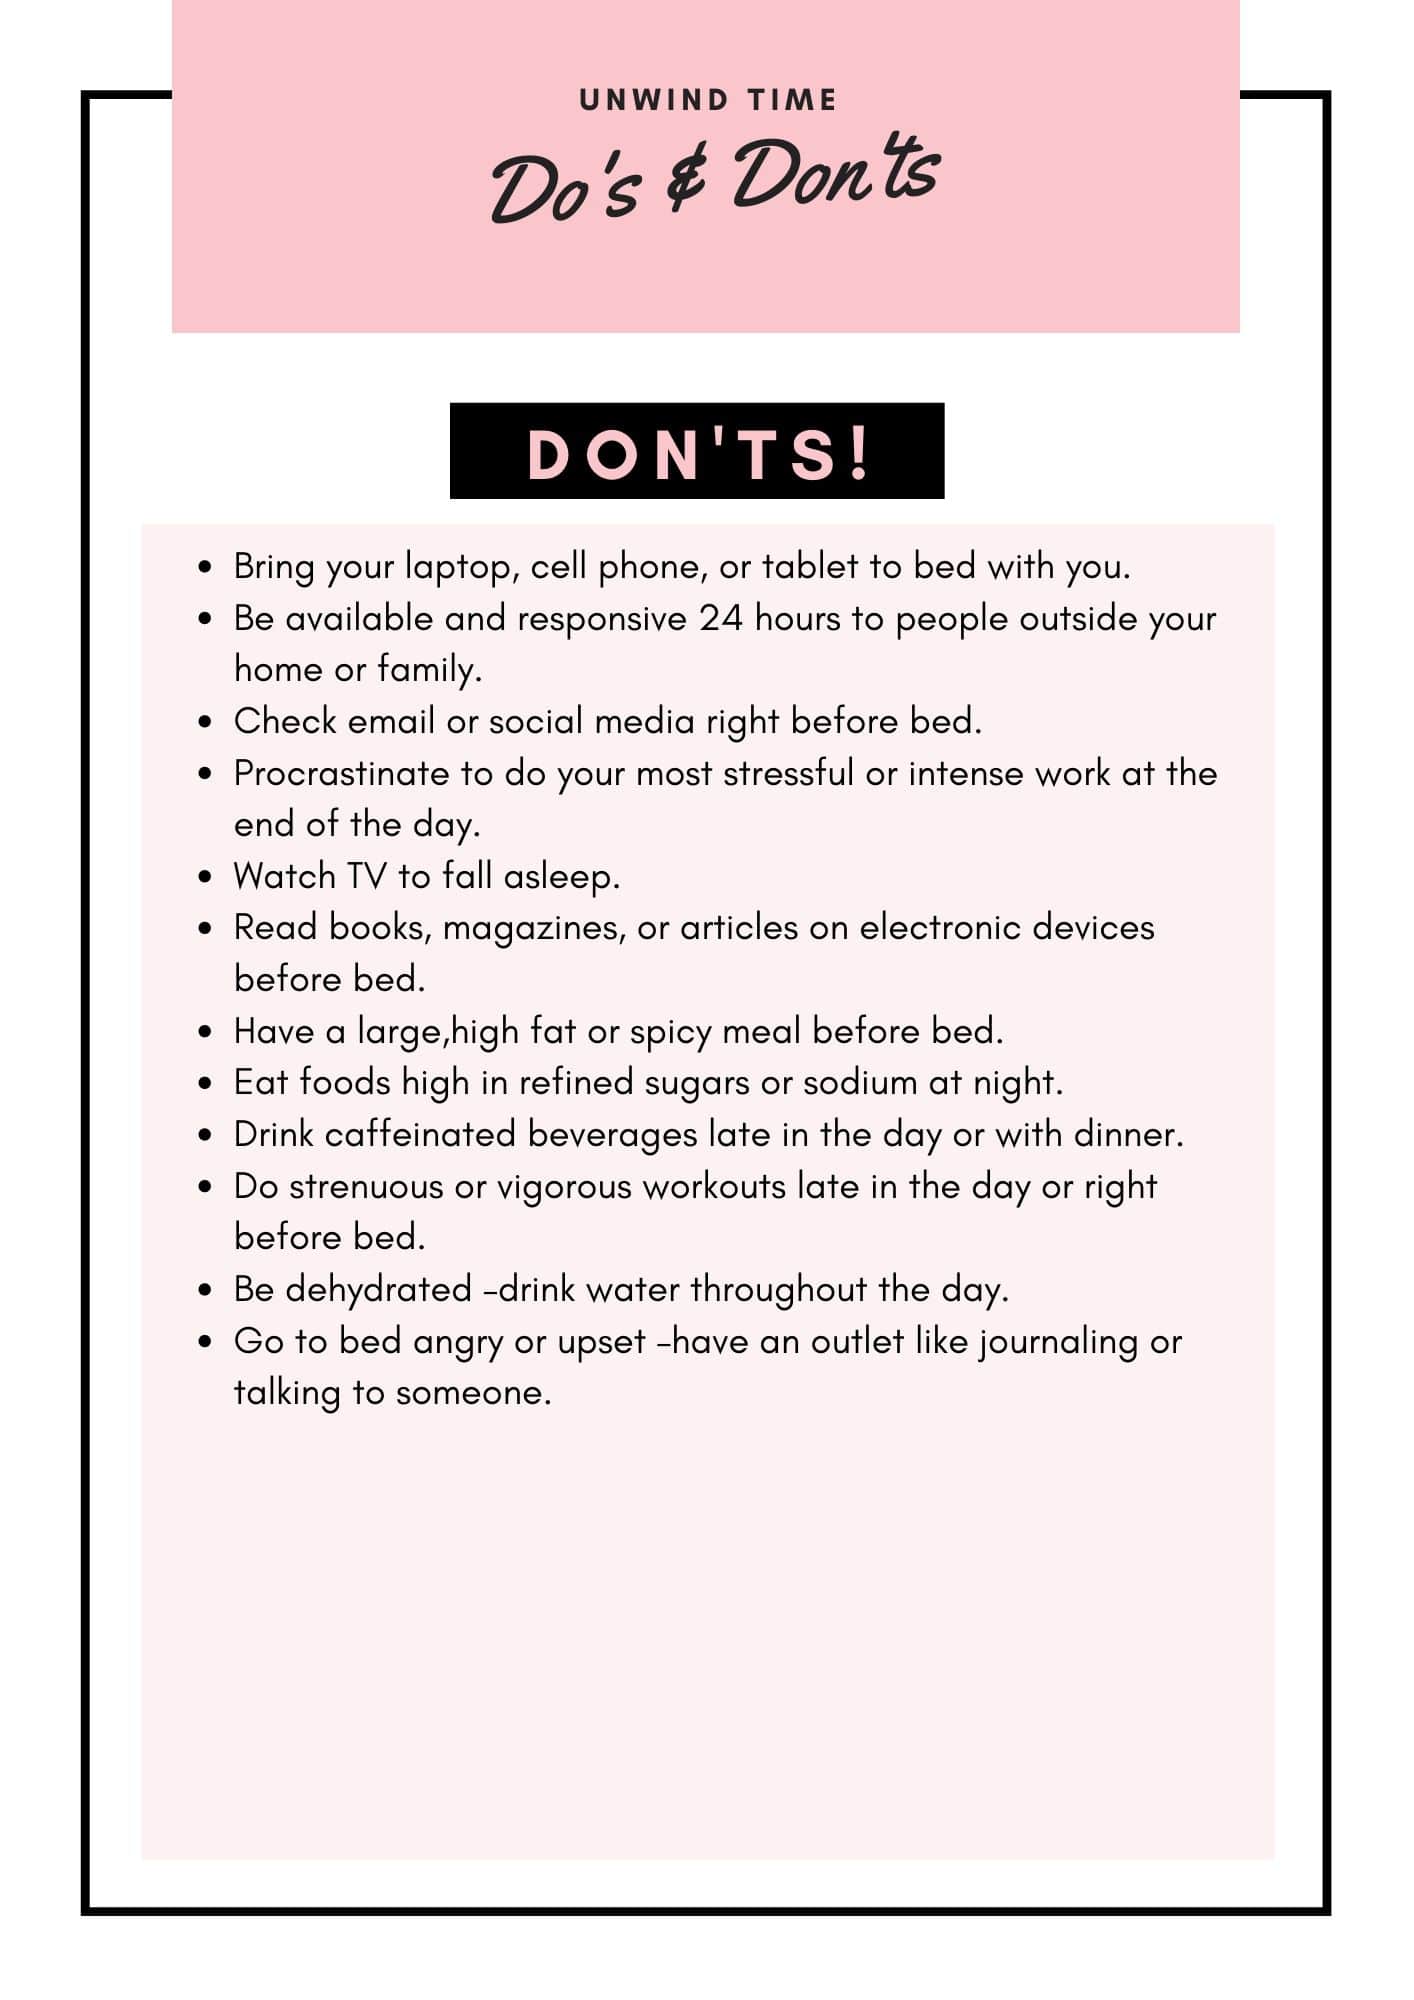 do's and don'ts of bedtime